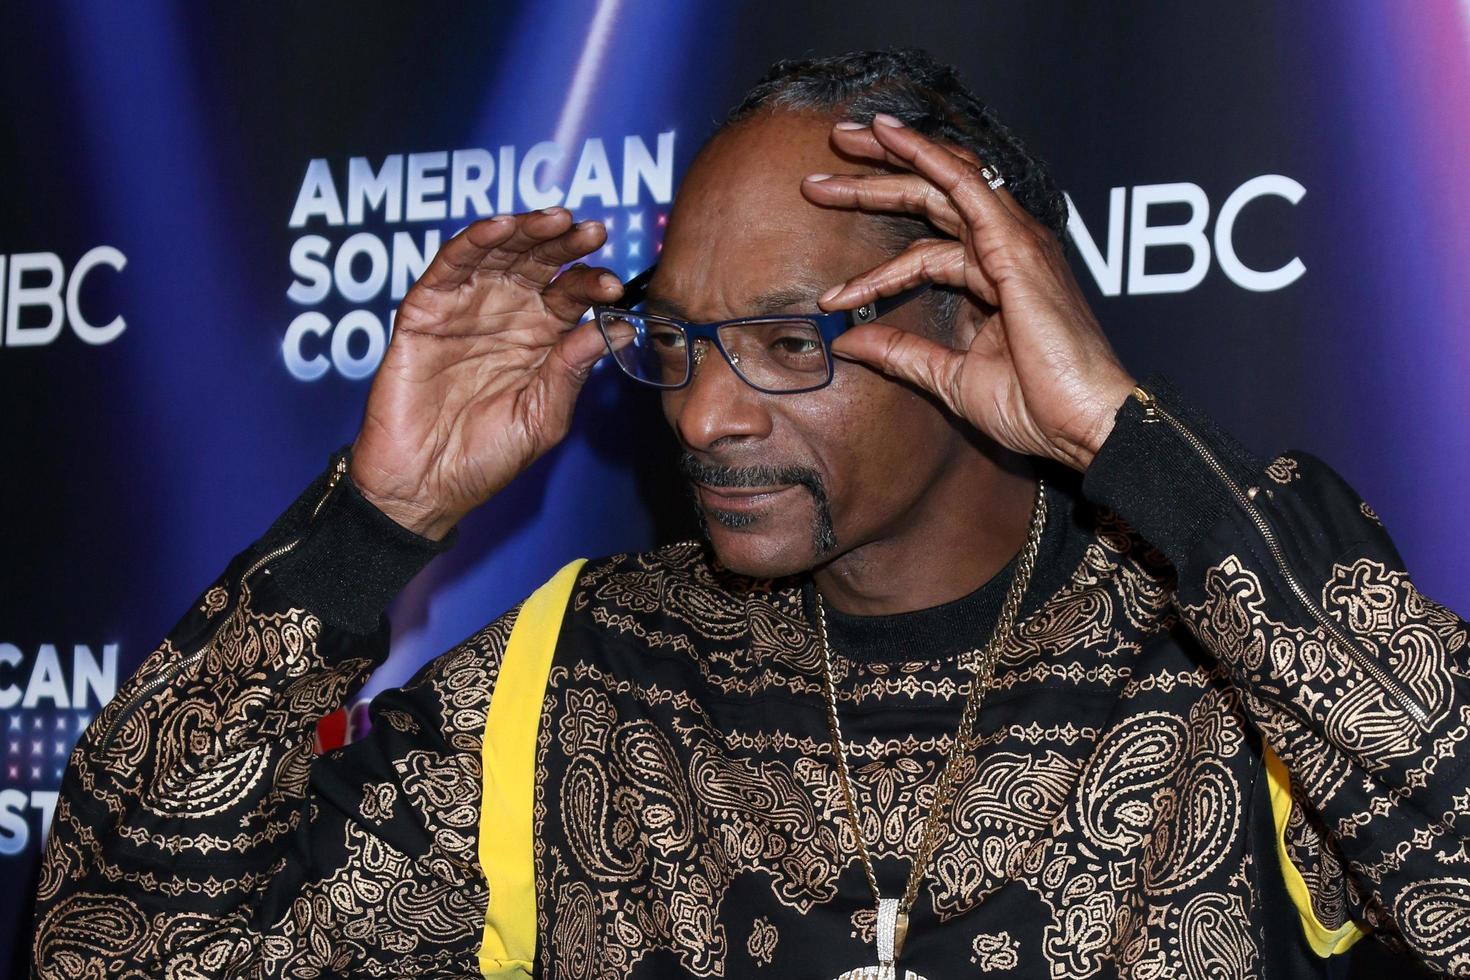 LOS ANGELES - MAR 21 - Snoop Dogg at the American Song Contest Live Show Red Carpet at Universal Back Lot on March 21, 2022 in Los Angeles, CA photo